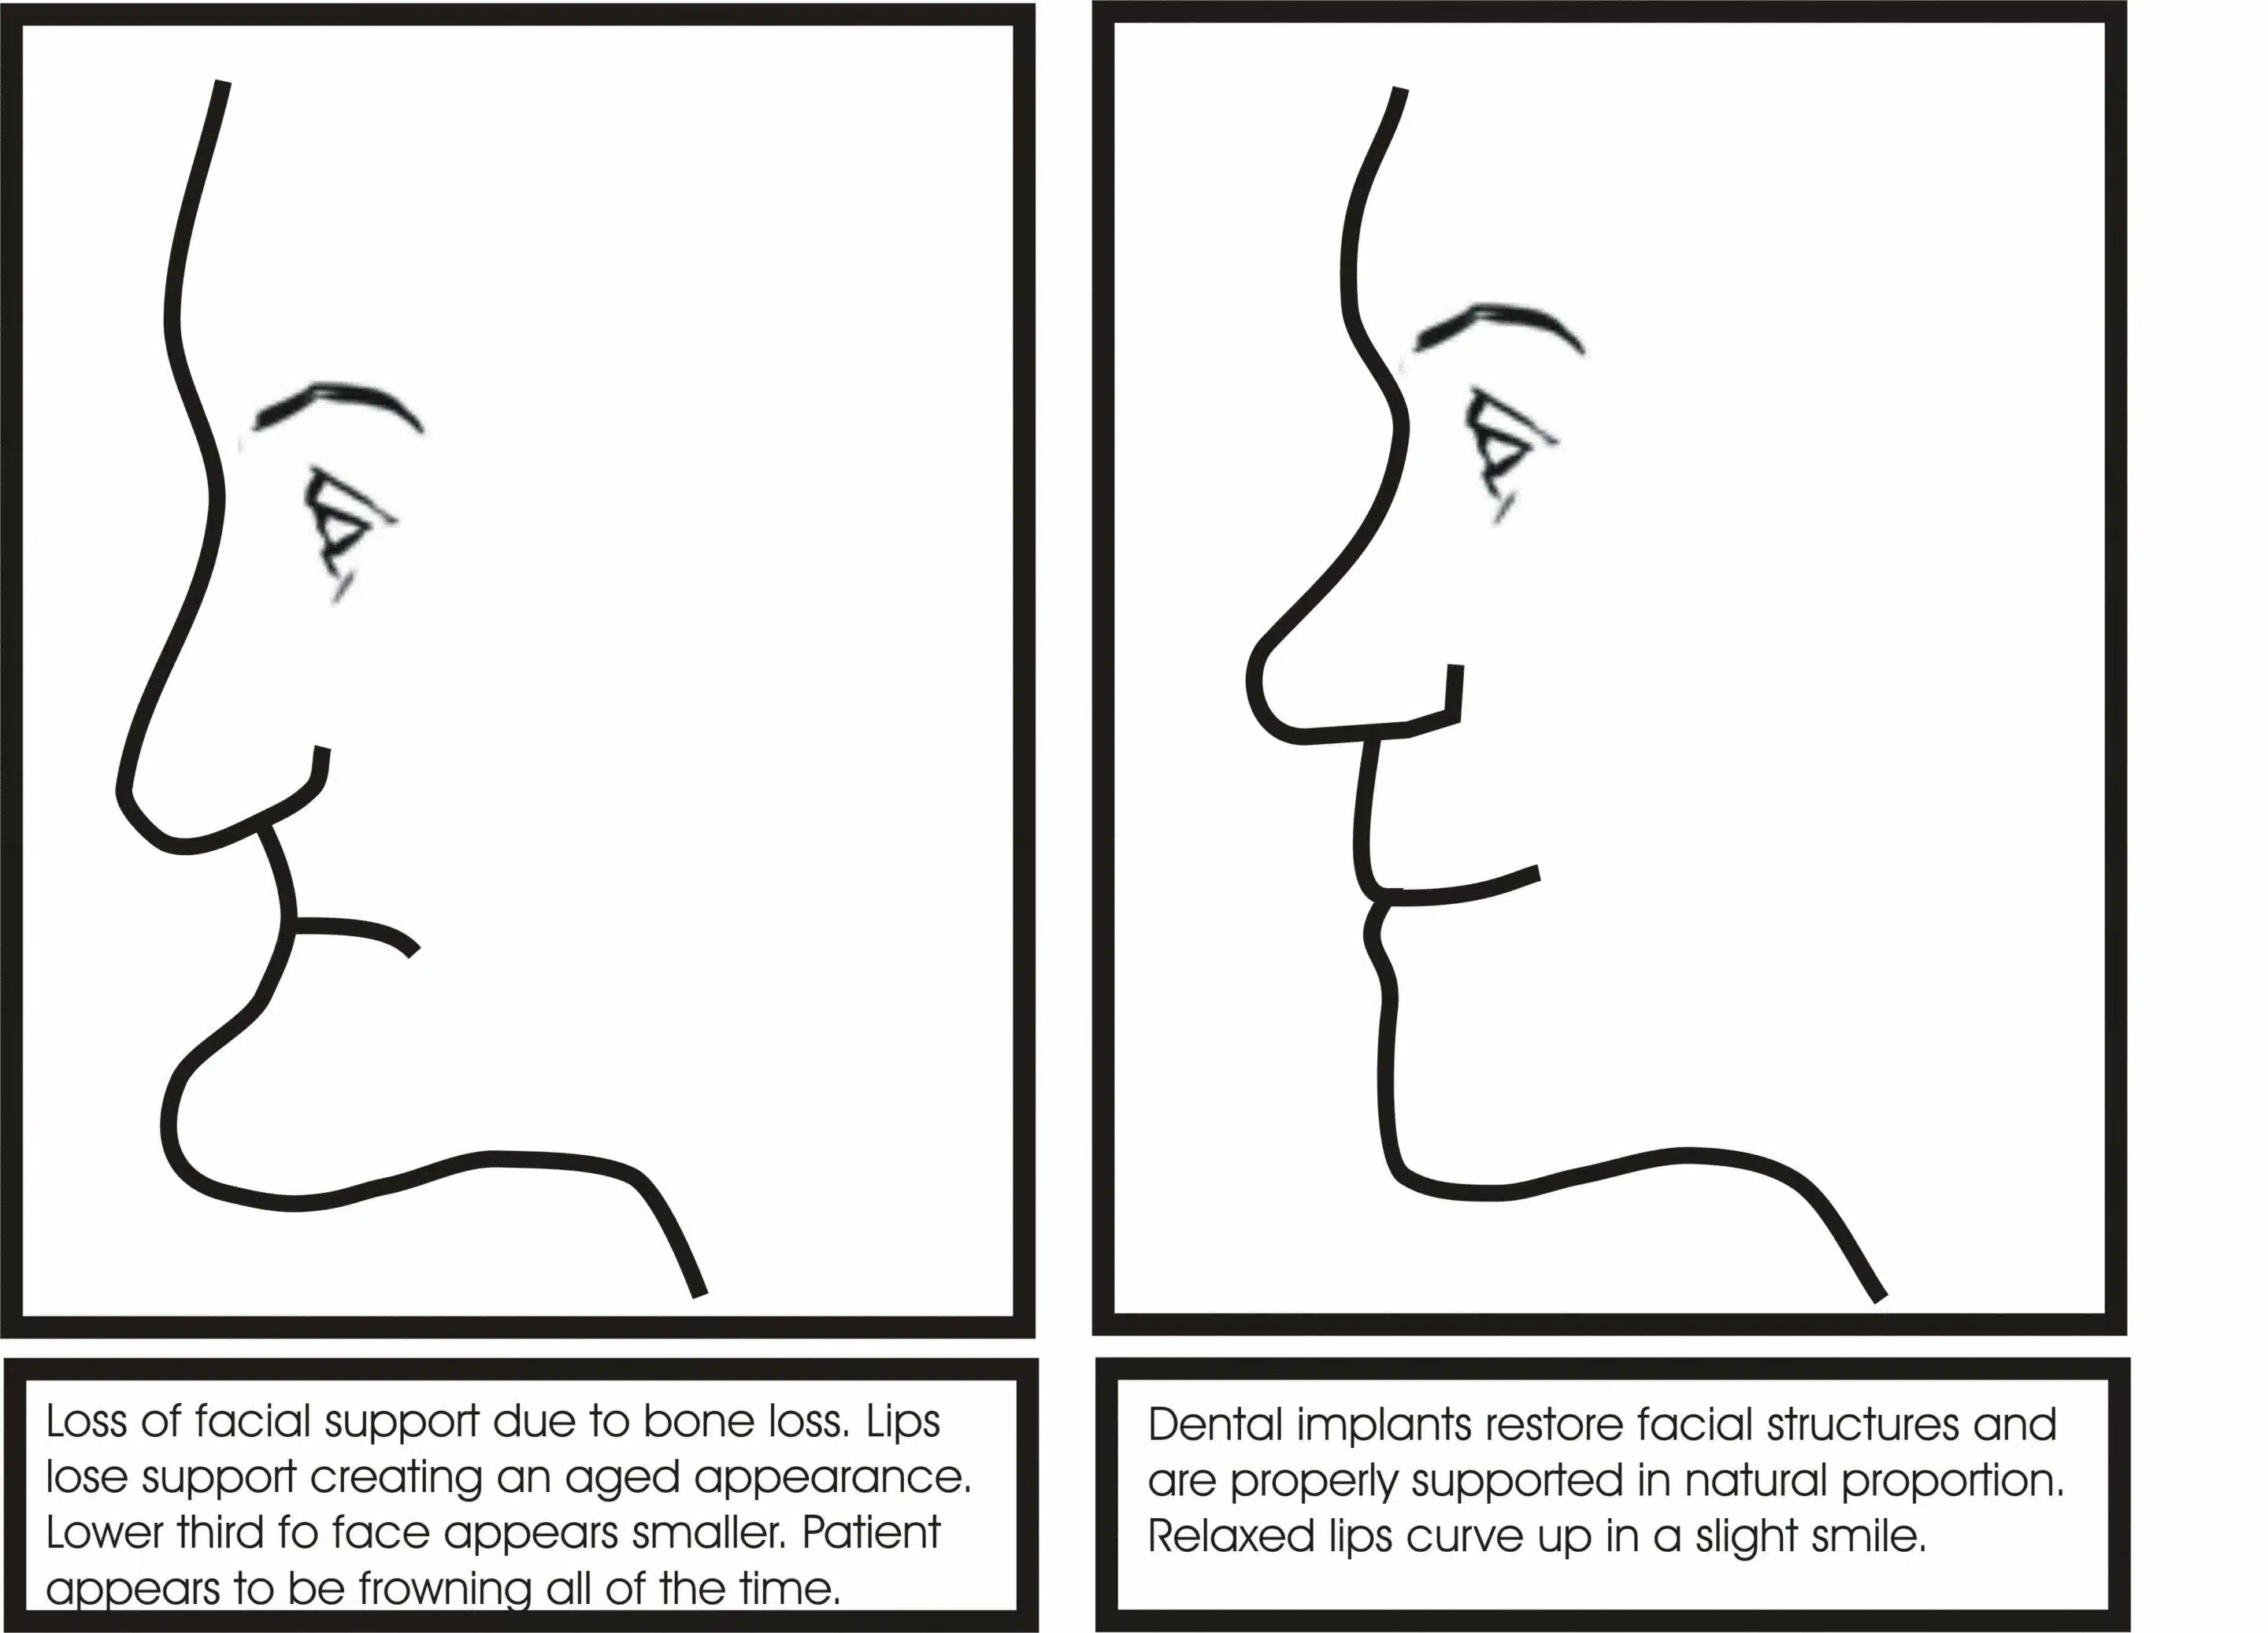 Illustration of facial collapse due to bone loss and restoration of facial proportion following dental implant treatment